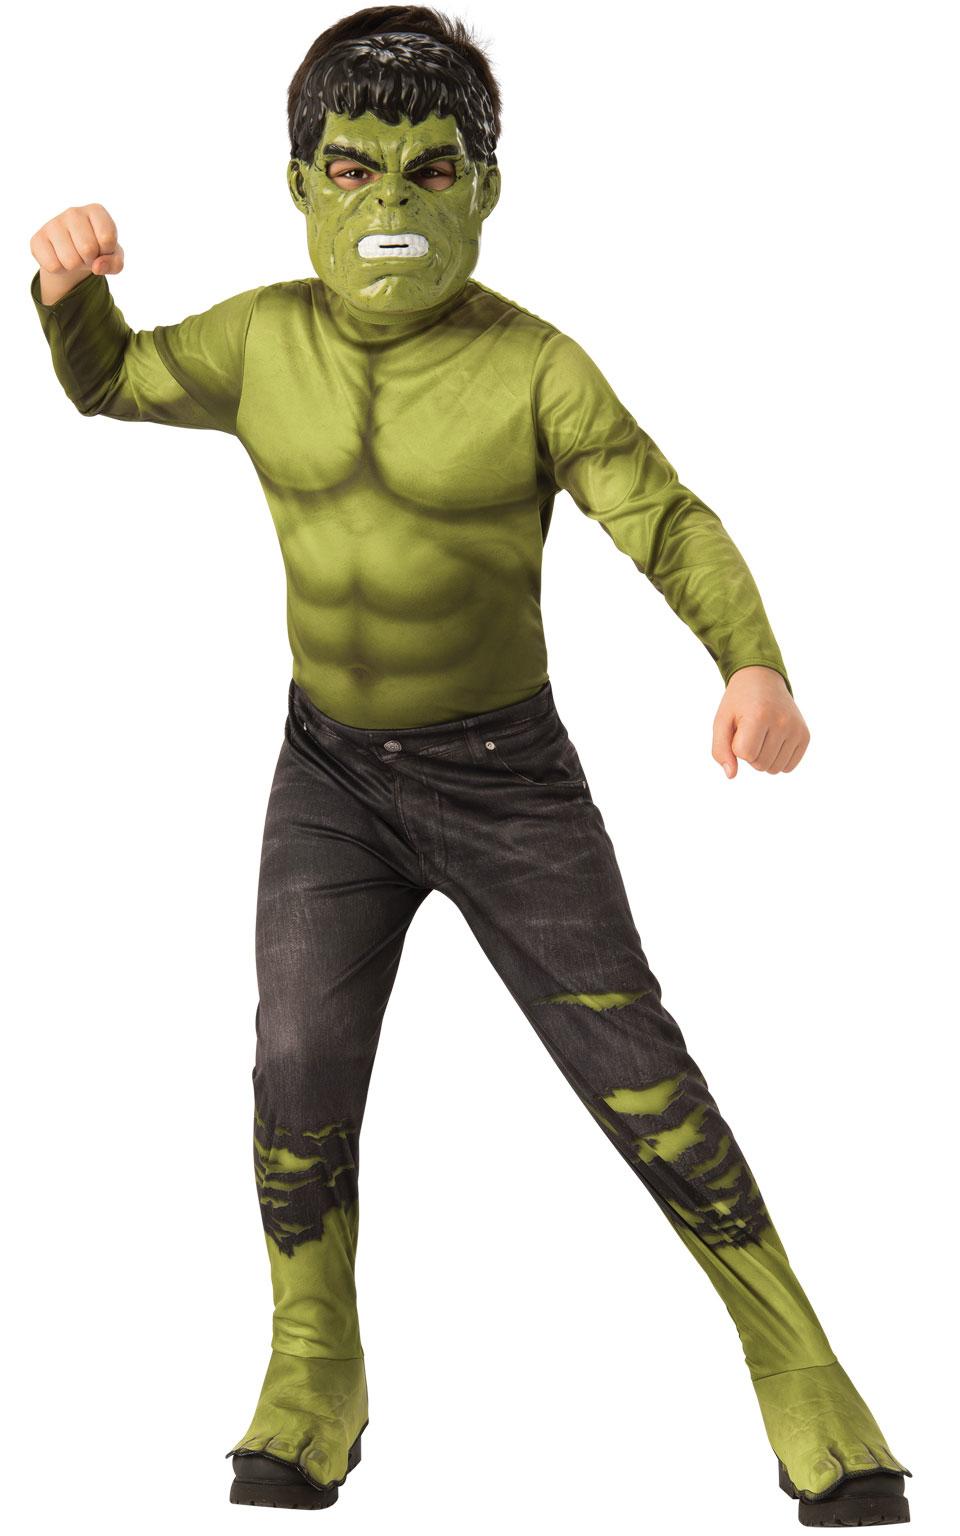 Hulk Fancy Dress Costume for Boys by Rubies 700648 available here at Karnival Costumes online party shop